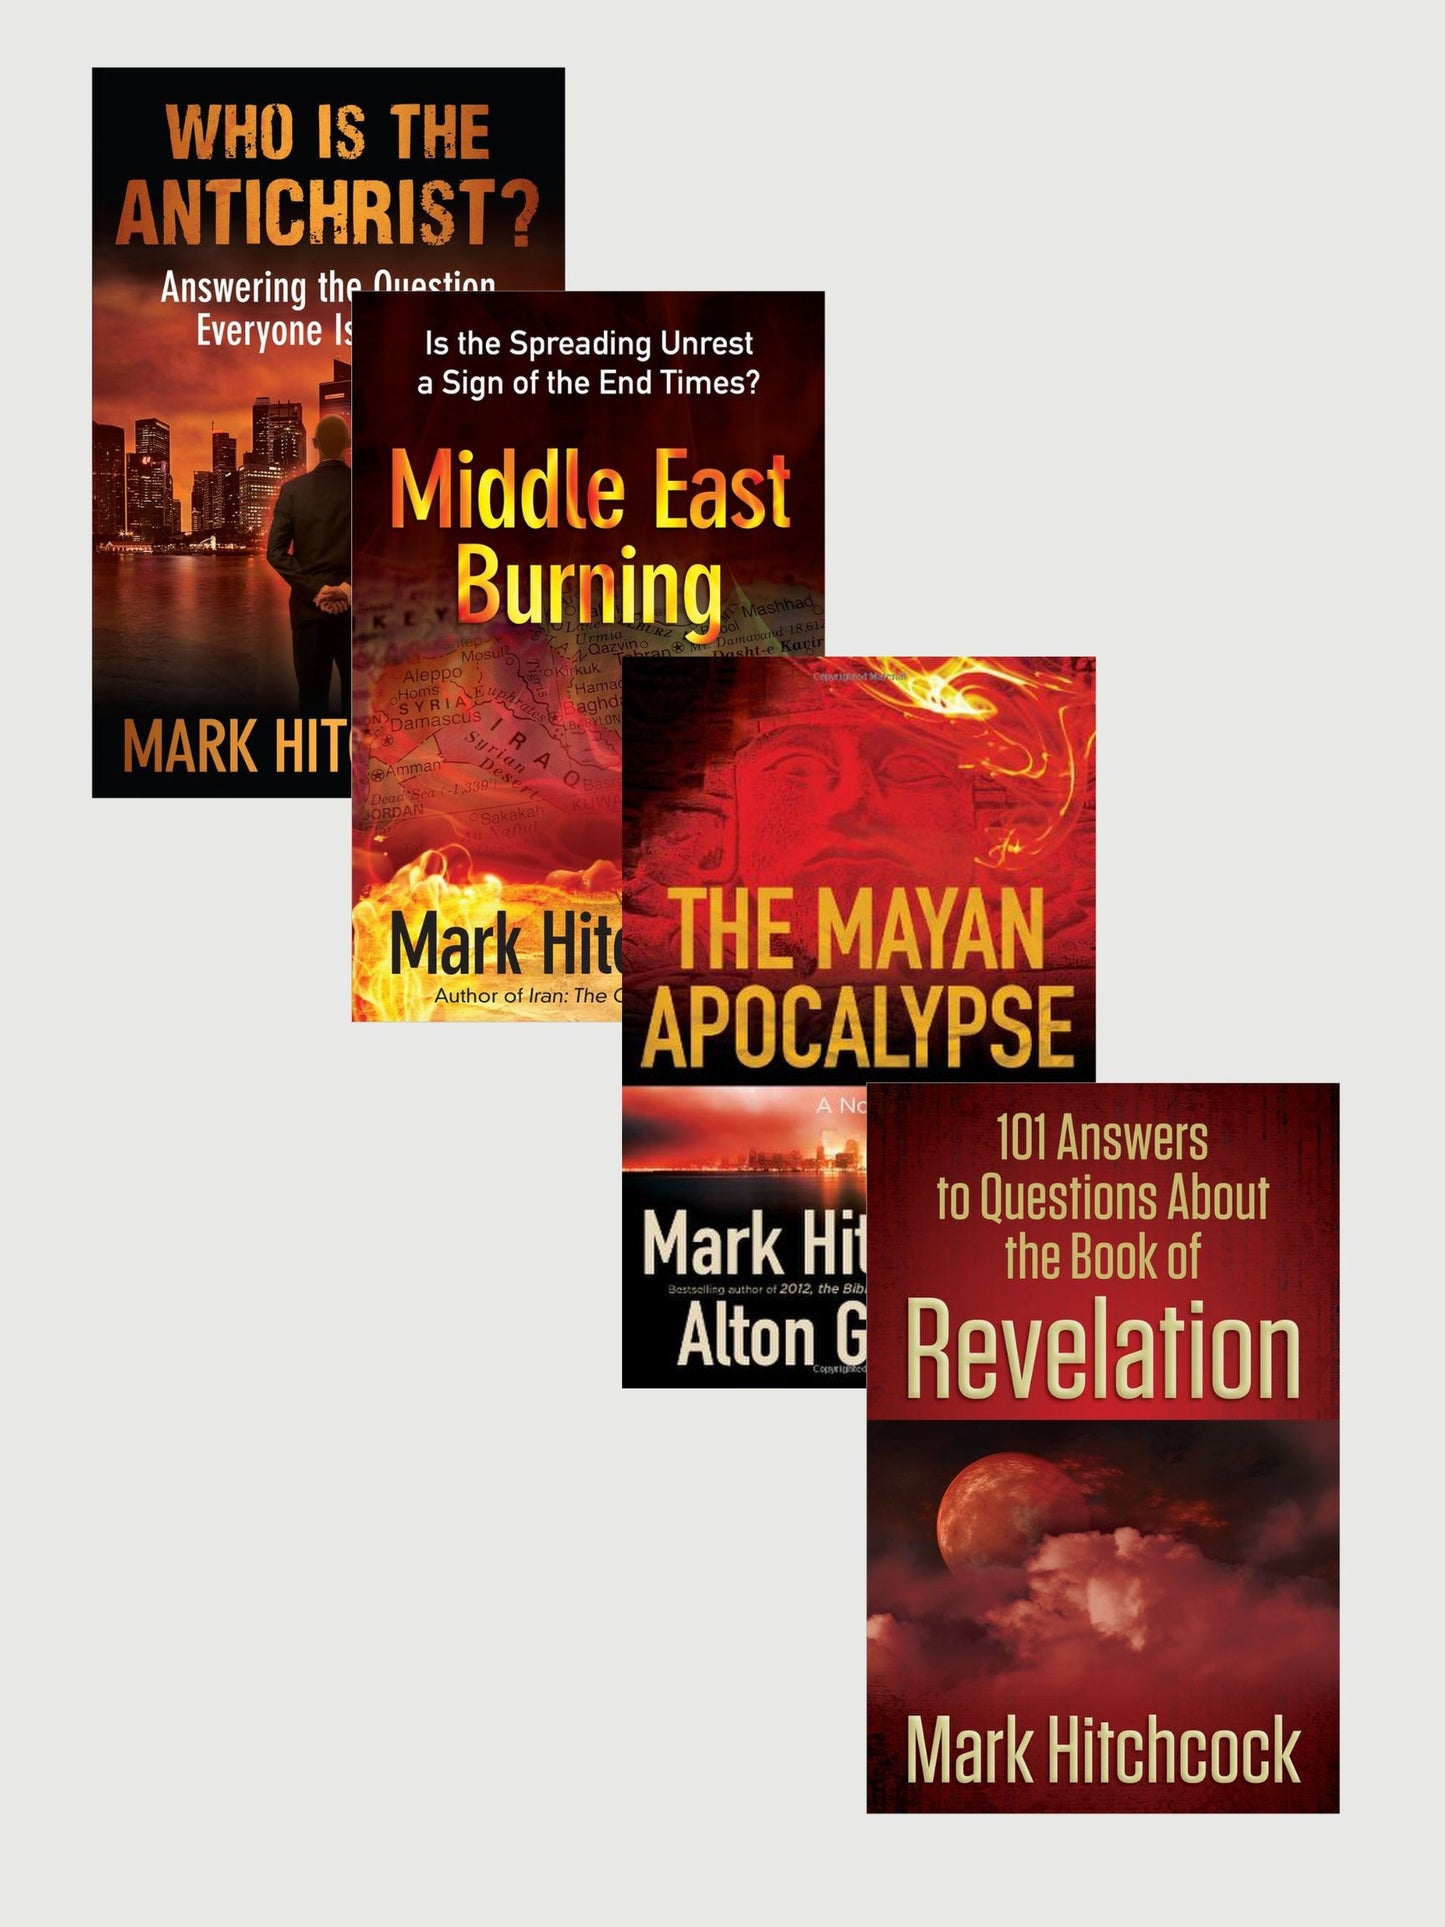 END TIMES COLLECTION MARK HITCHCOCK